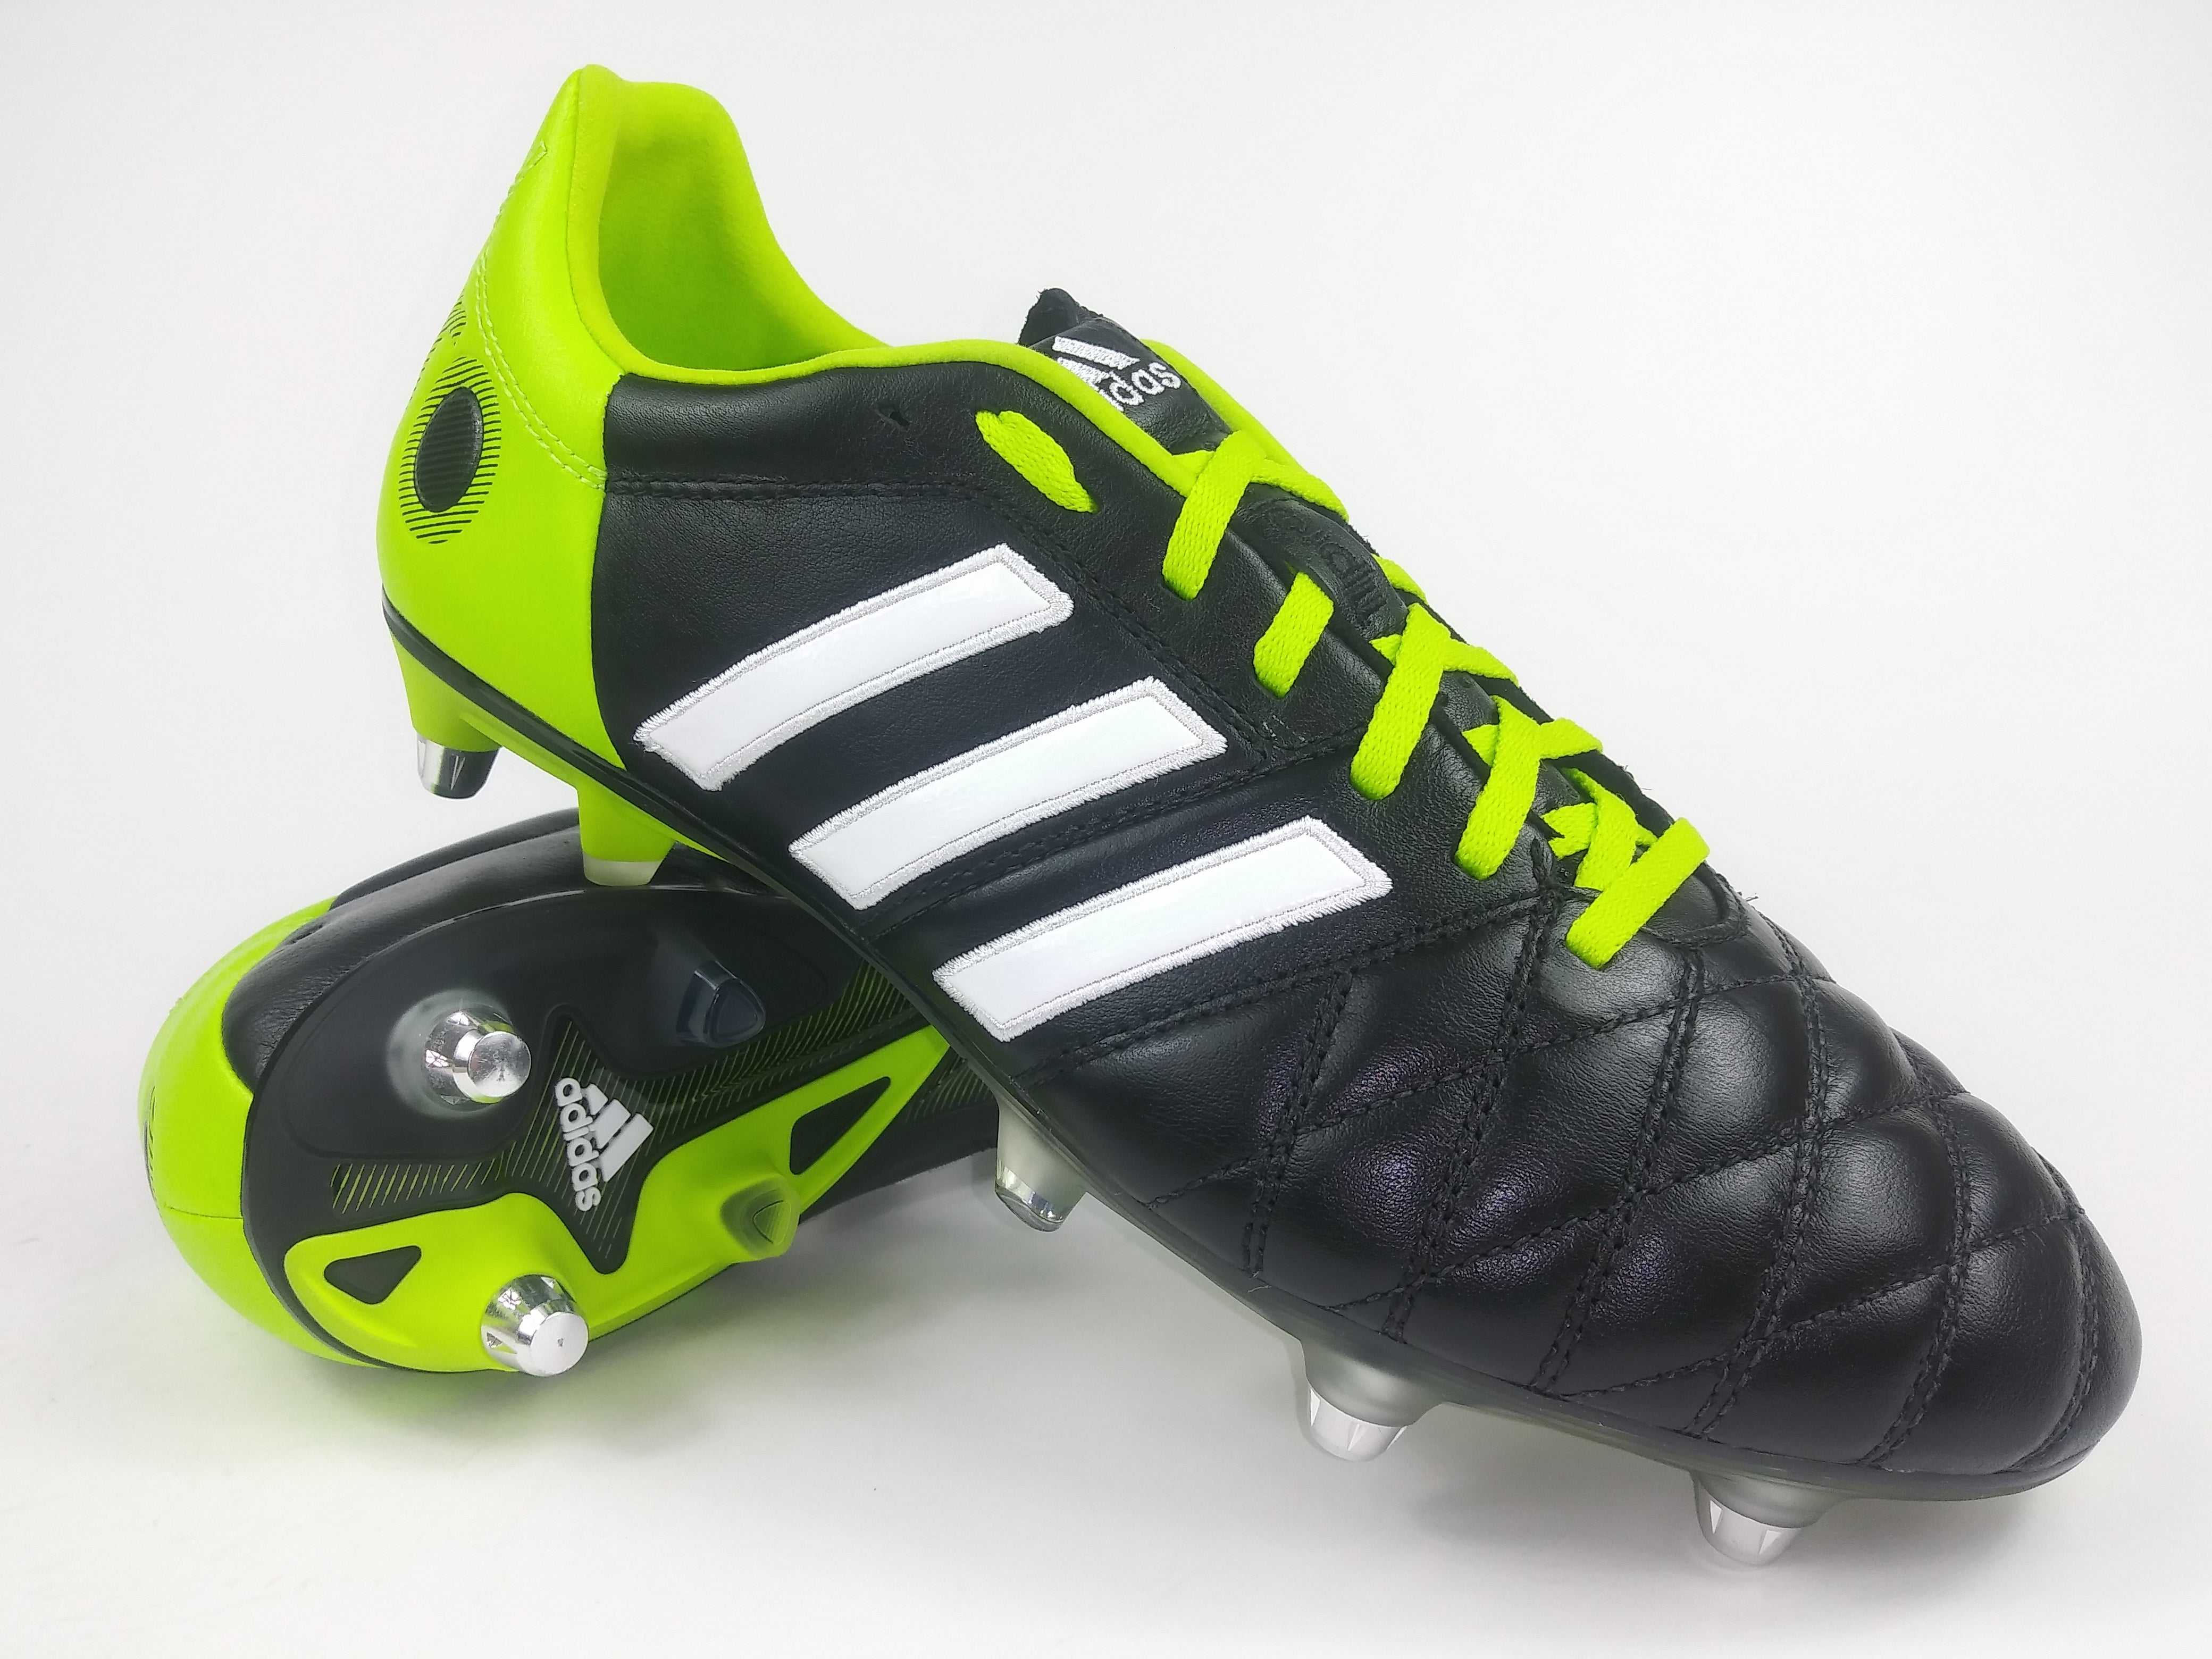 adidas 11pro soccer cleats